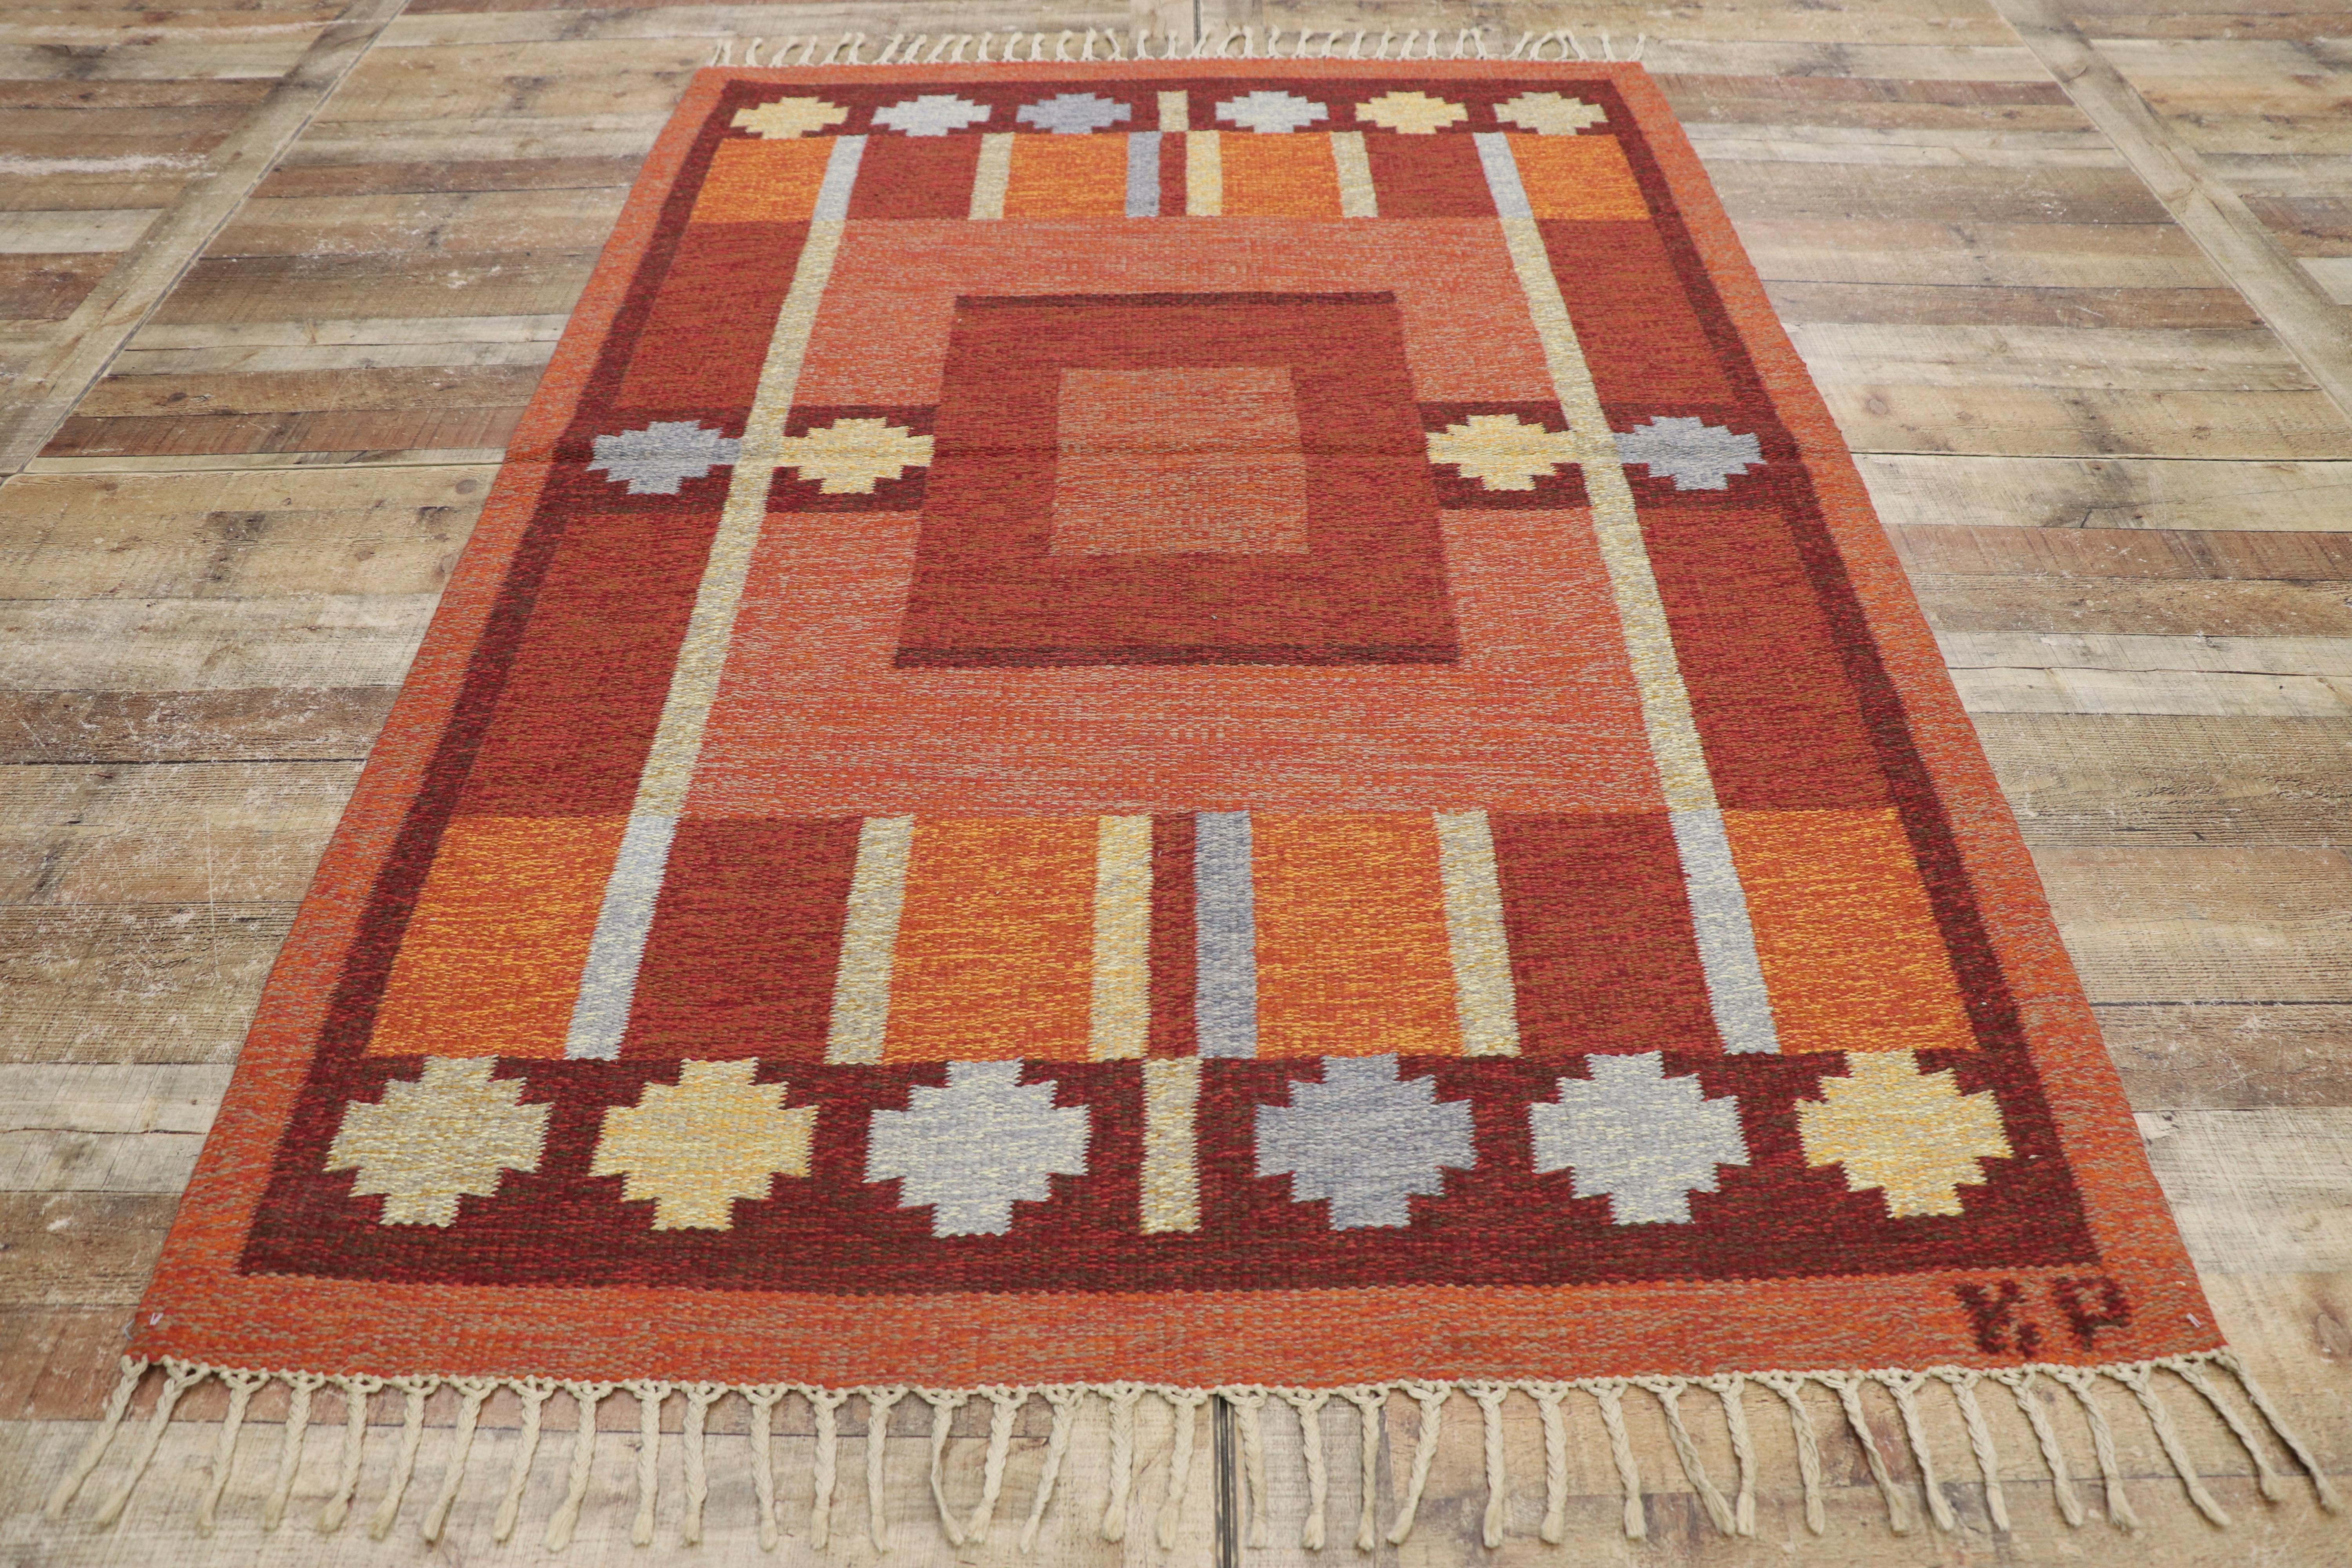 Vintage Swedish Kilim Rug with Scandinavian Modern Style by Kerstin Persson  For Sale 3